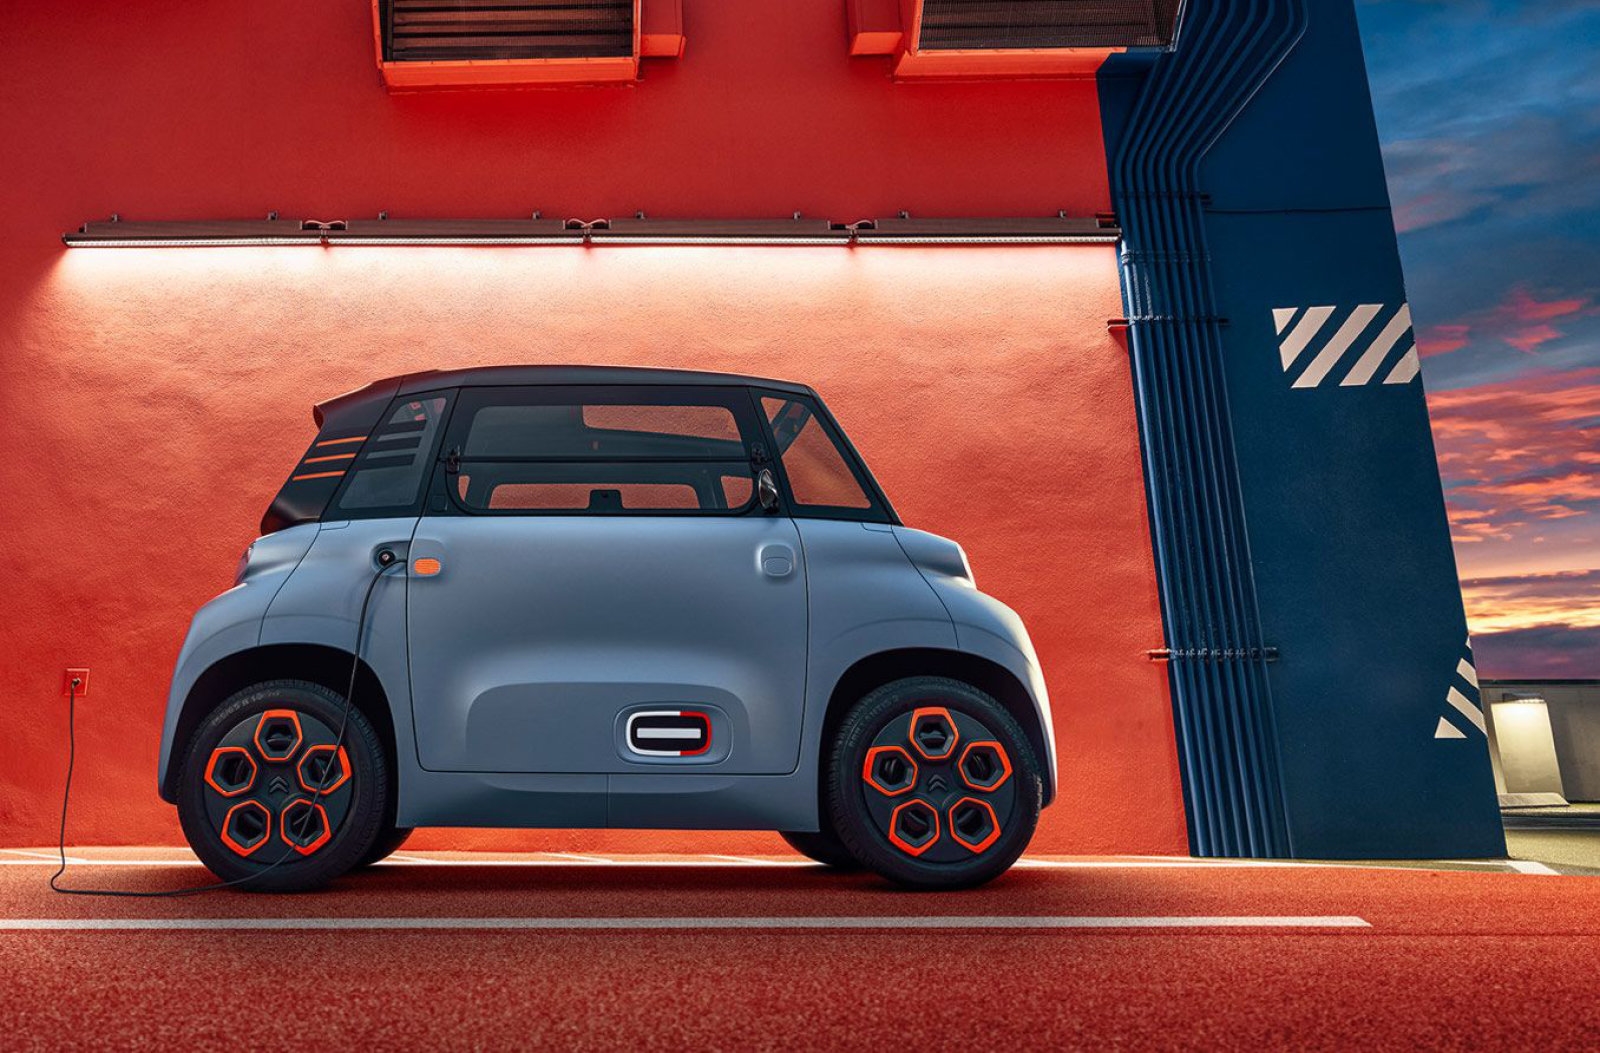 Citroën's new EV is a tiny two-seater that only costs $22 a month | DeviceDaily.com